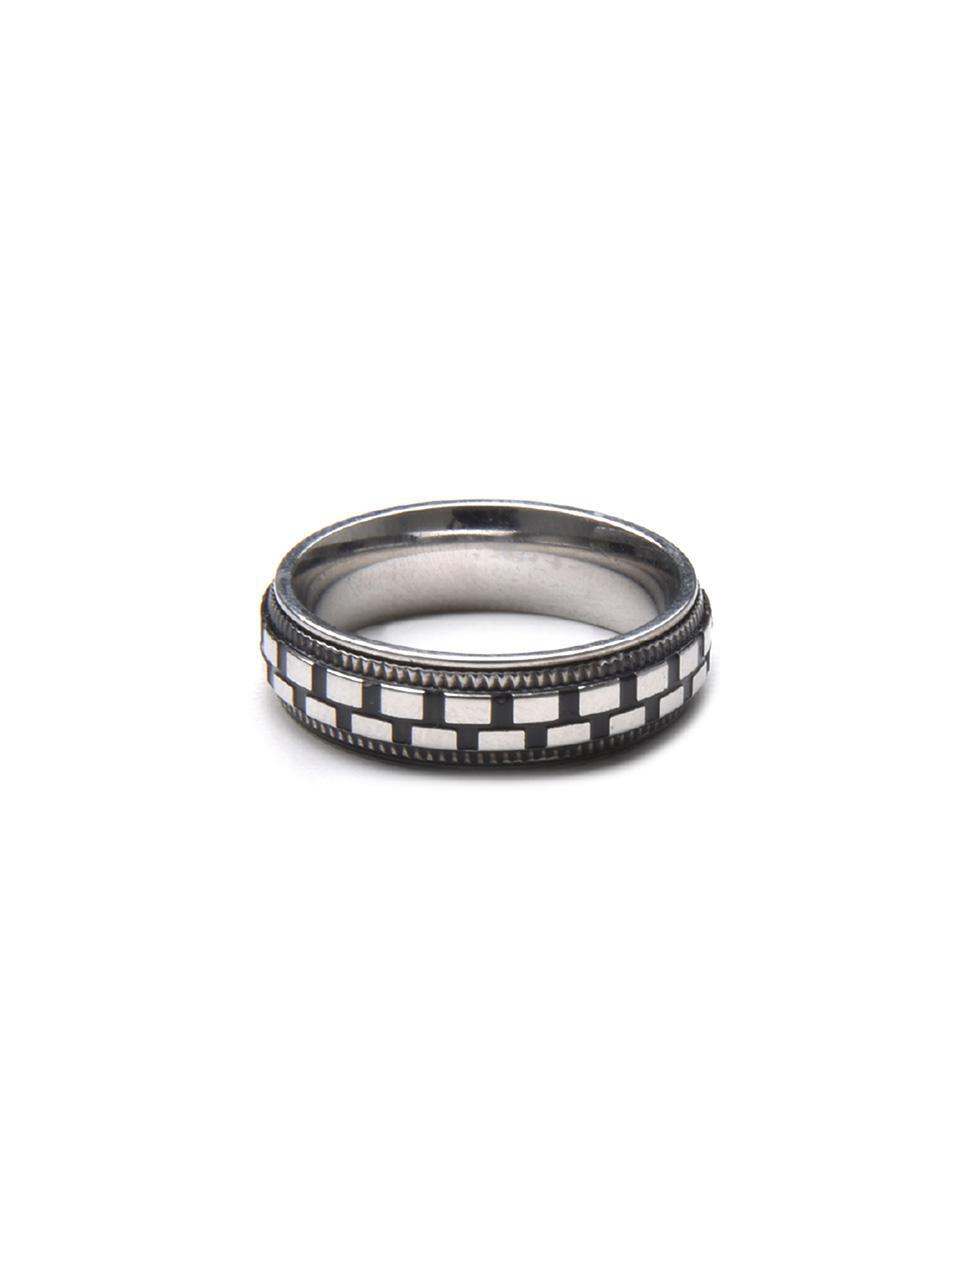 BA045 [Surgical steel] Black check ring